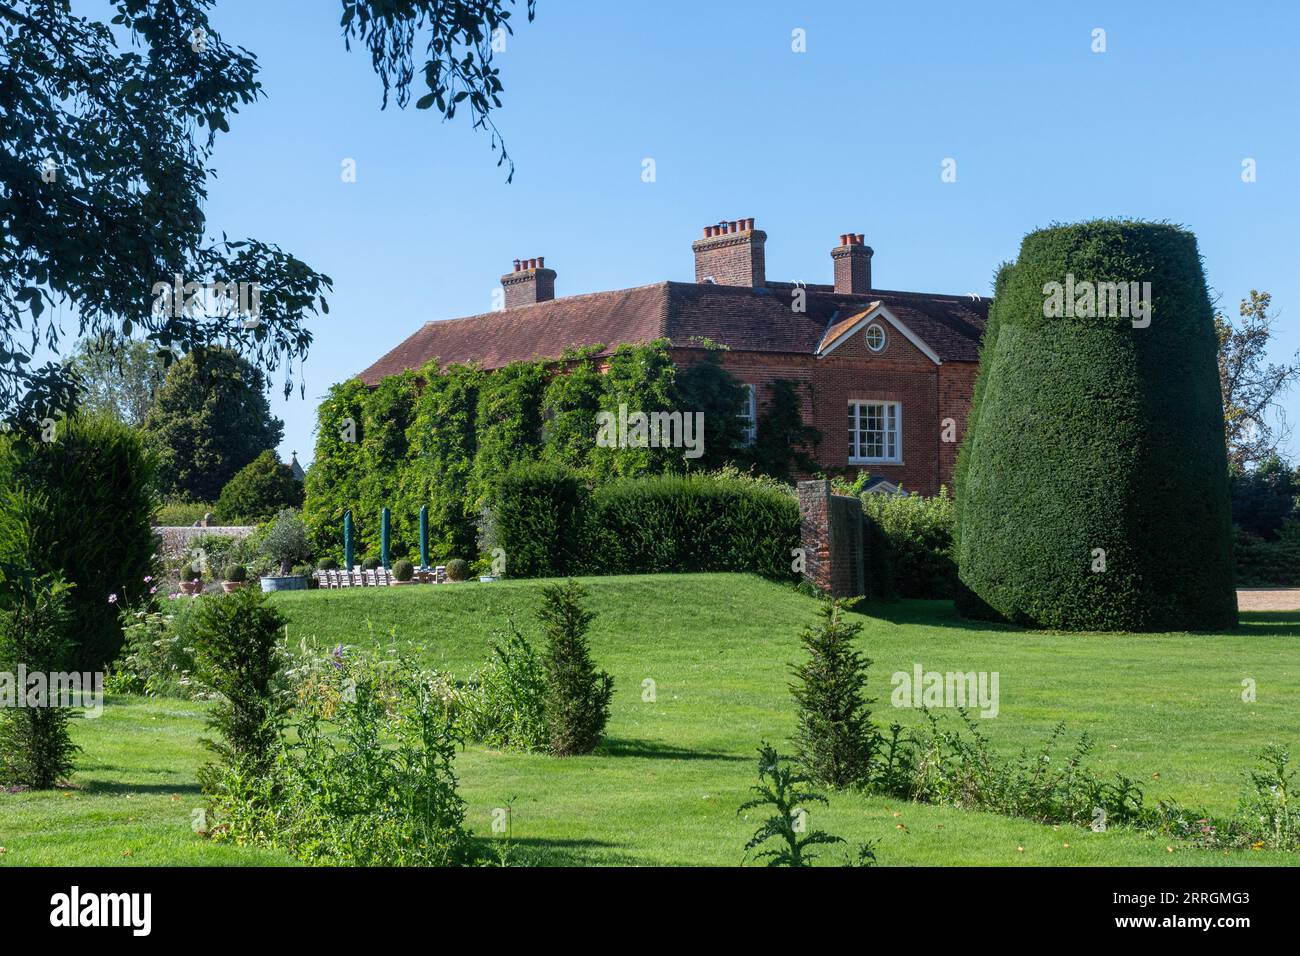 Oakley Manor house and garden, a large detached 18th century grade II listed building, Hampshire, England, UK. Country estate Stock Photo